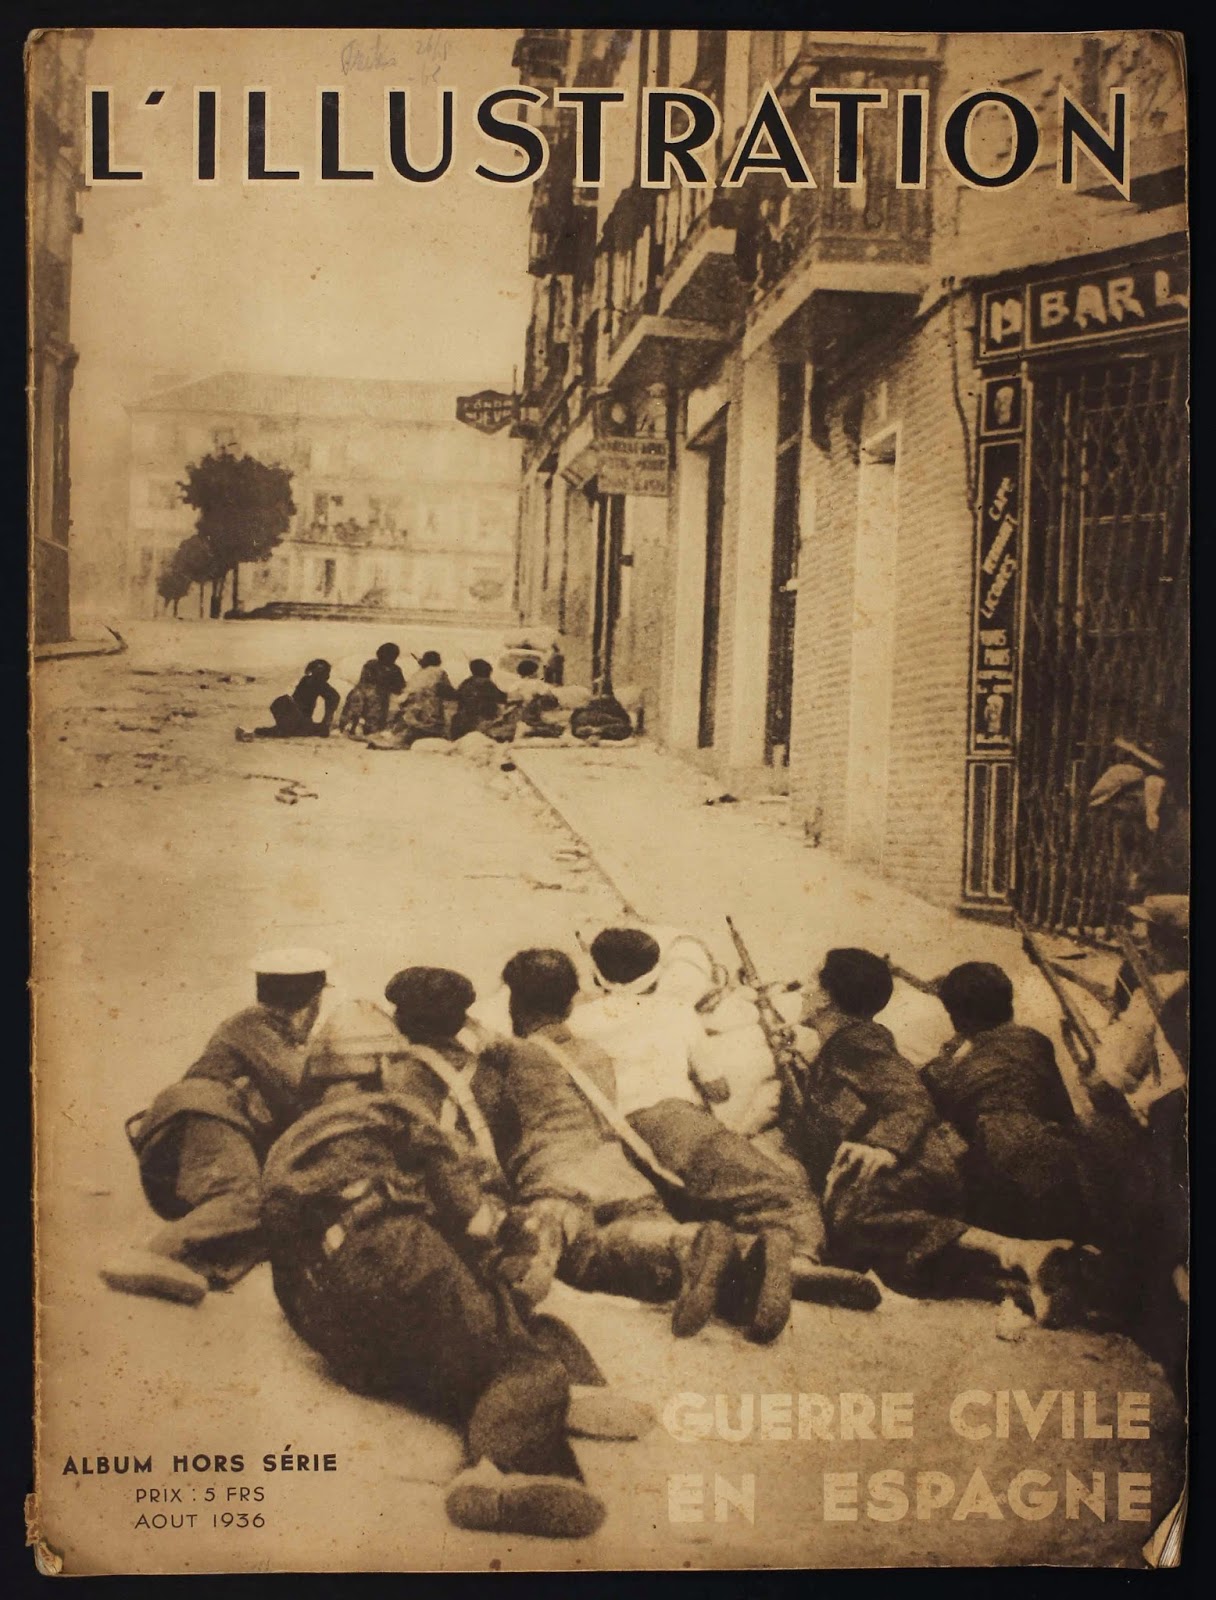 Cover of French illustrated magainze "L'Illustration"  showing soldiers in the streets.